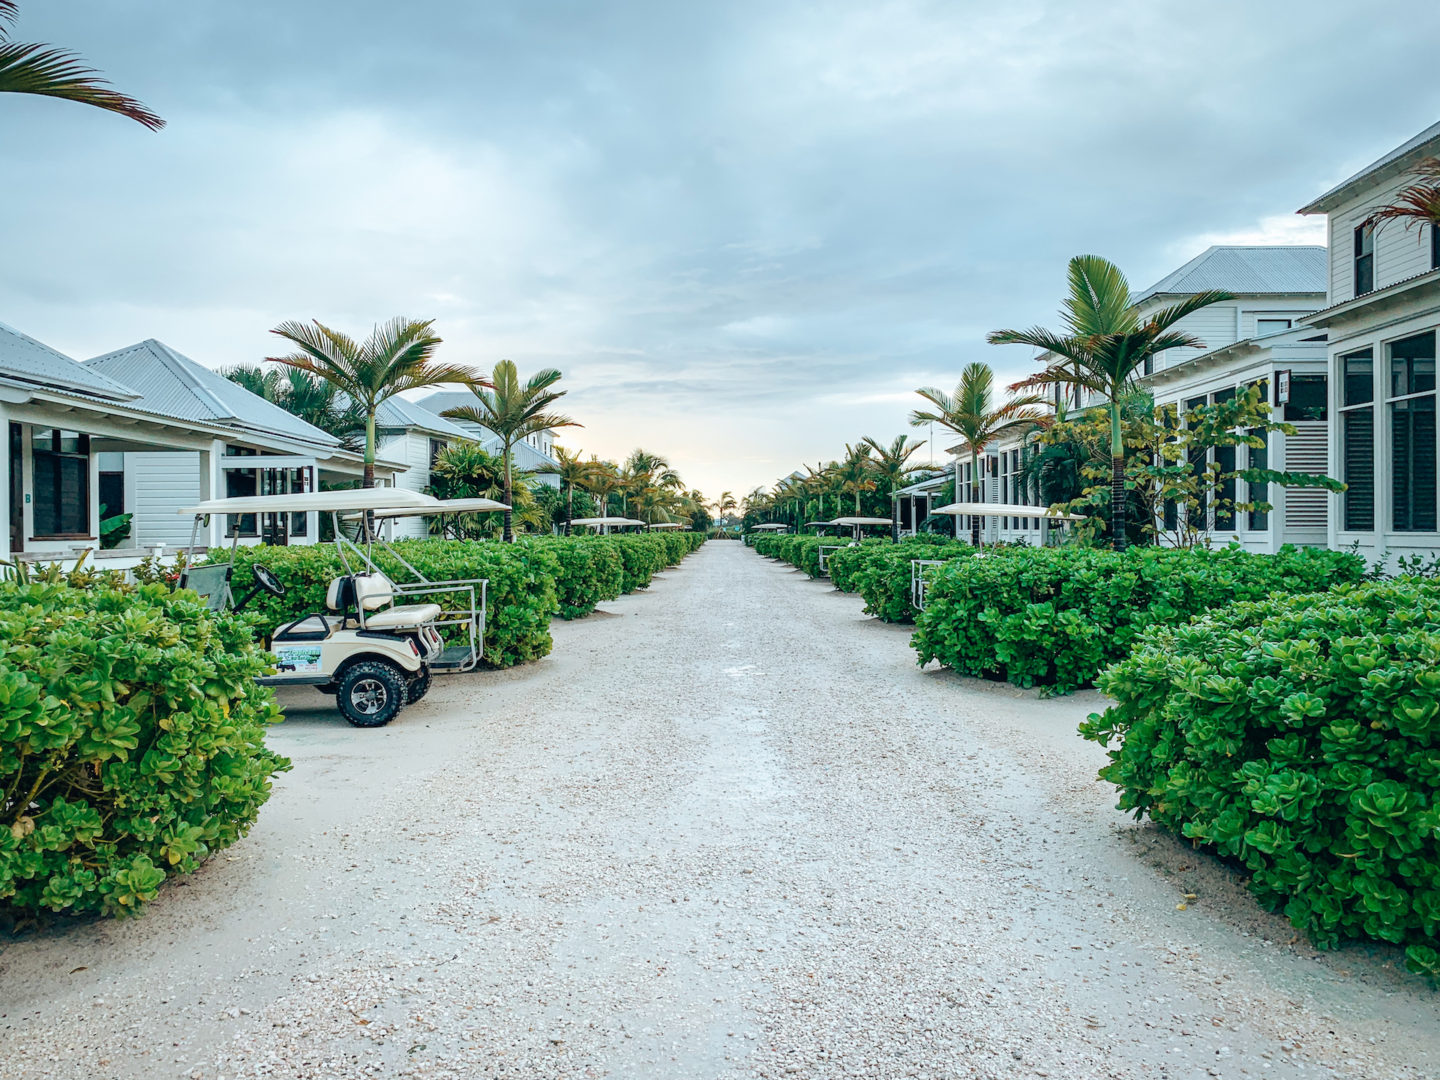 Lane of cottages and golf carts - Mahogany Bay, Belize